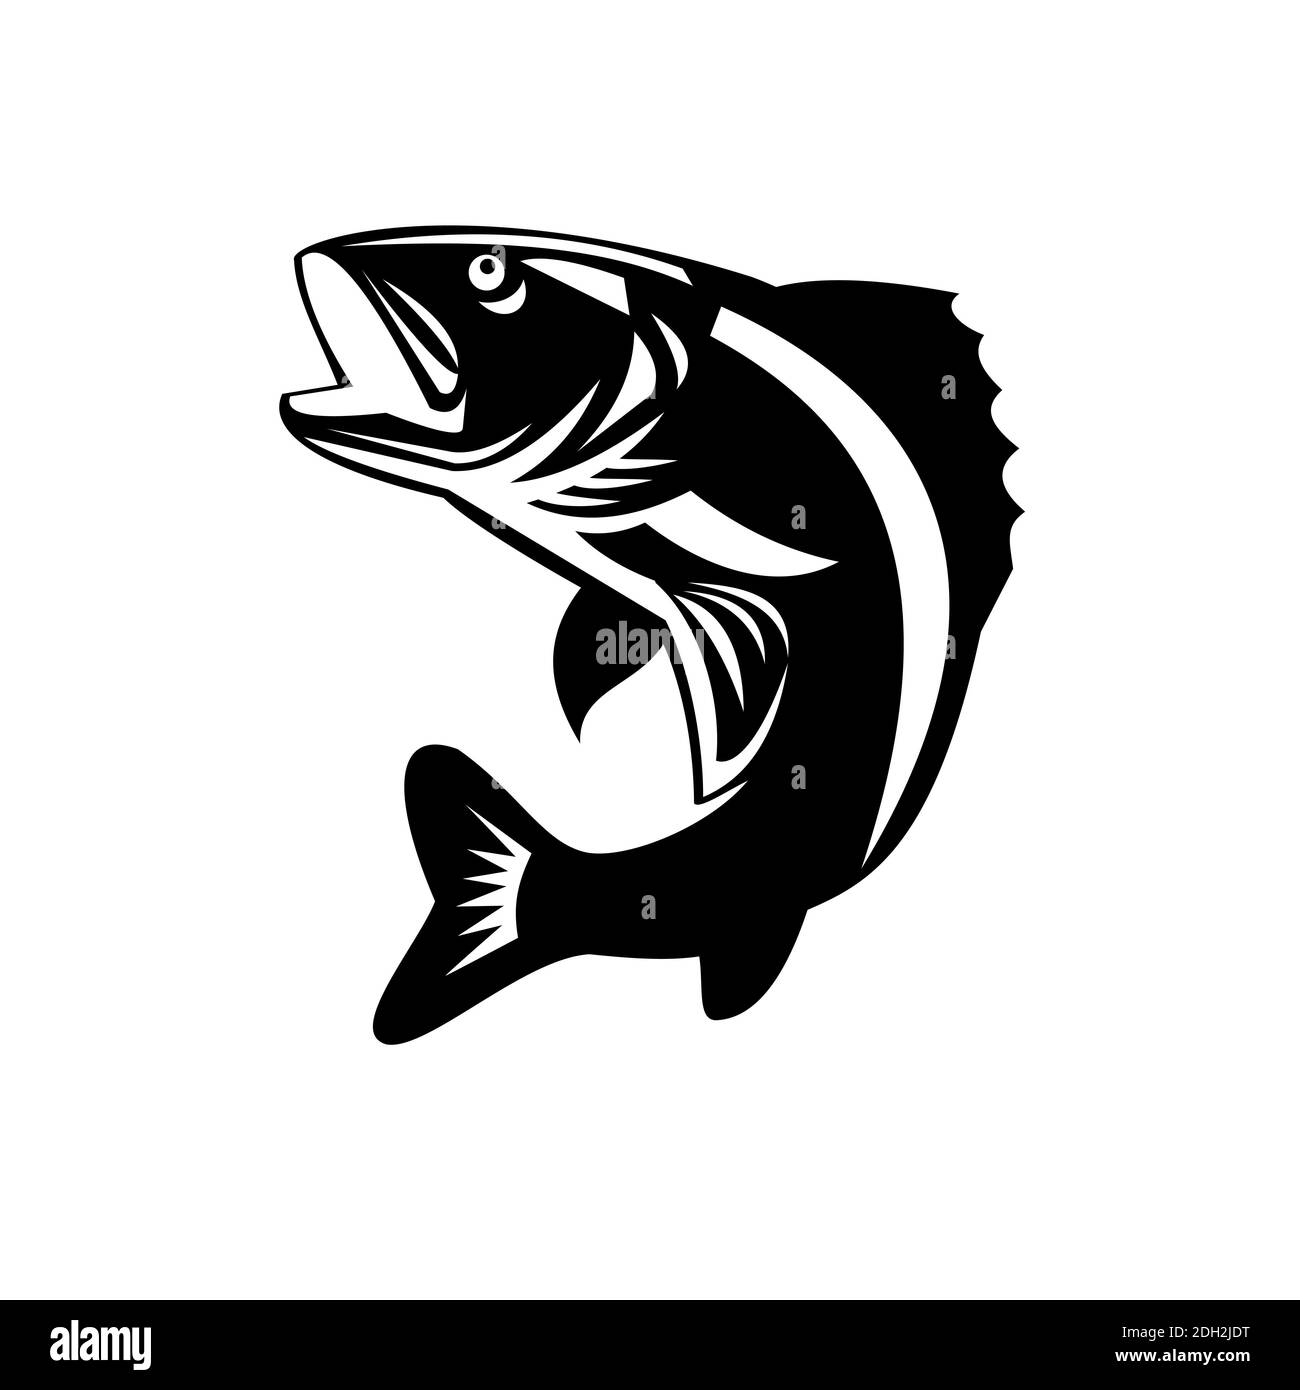 Walleye Fish Jumping Up Isolated Retro Black and White Stock Photo